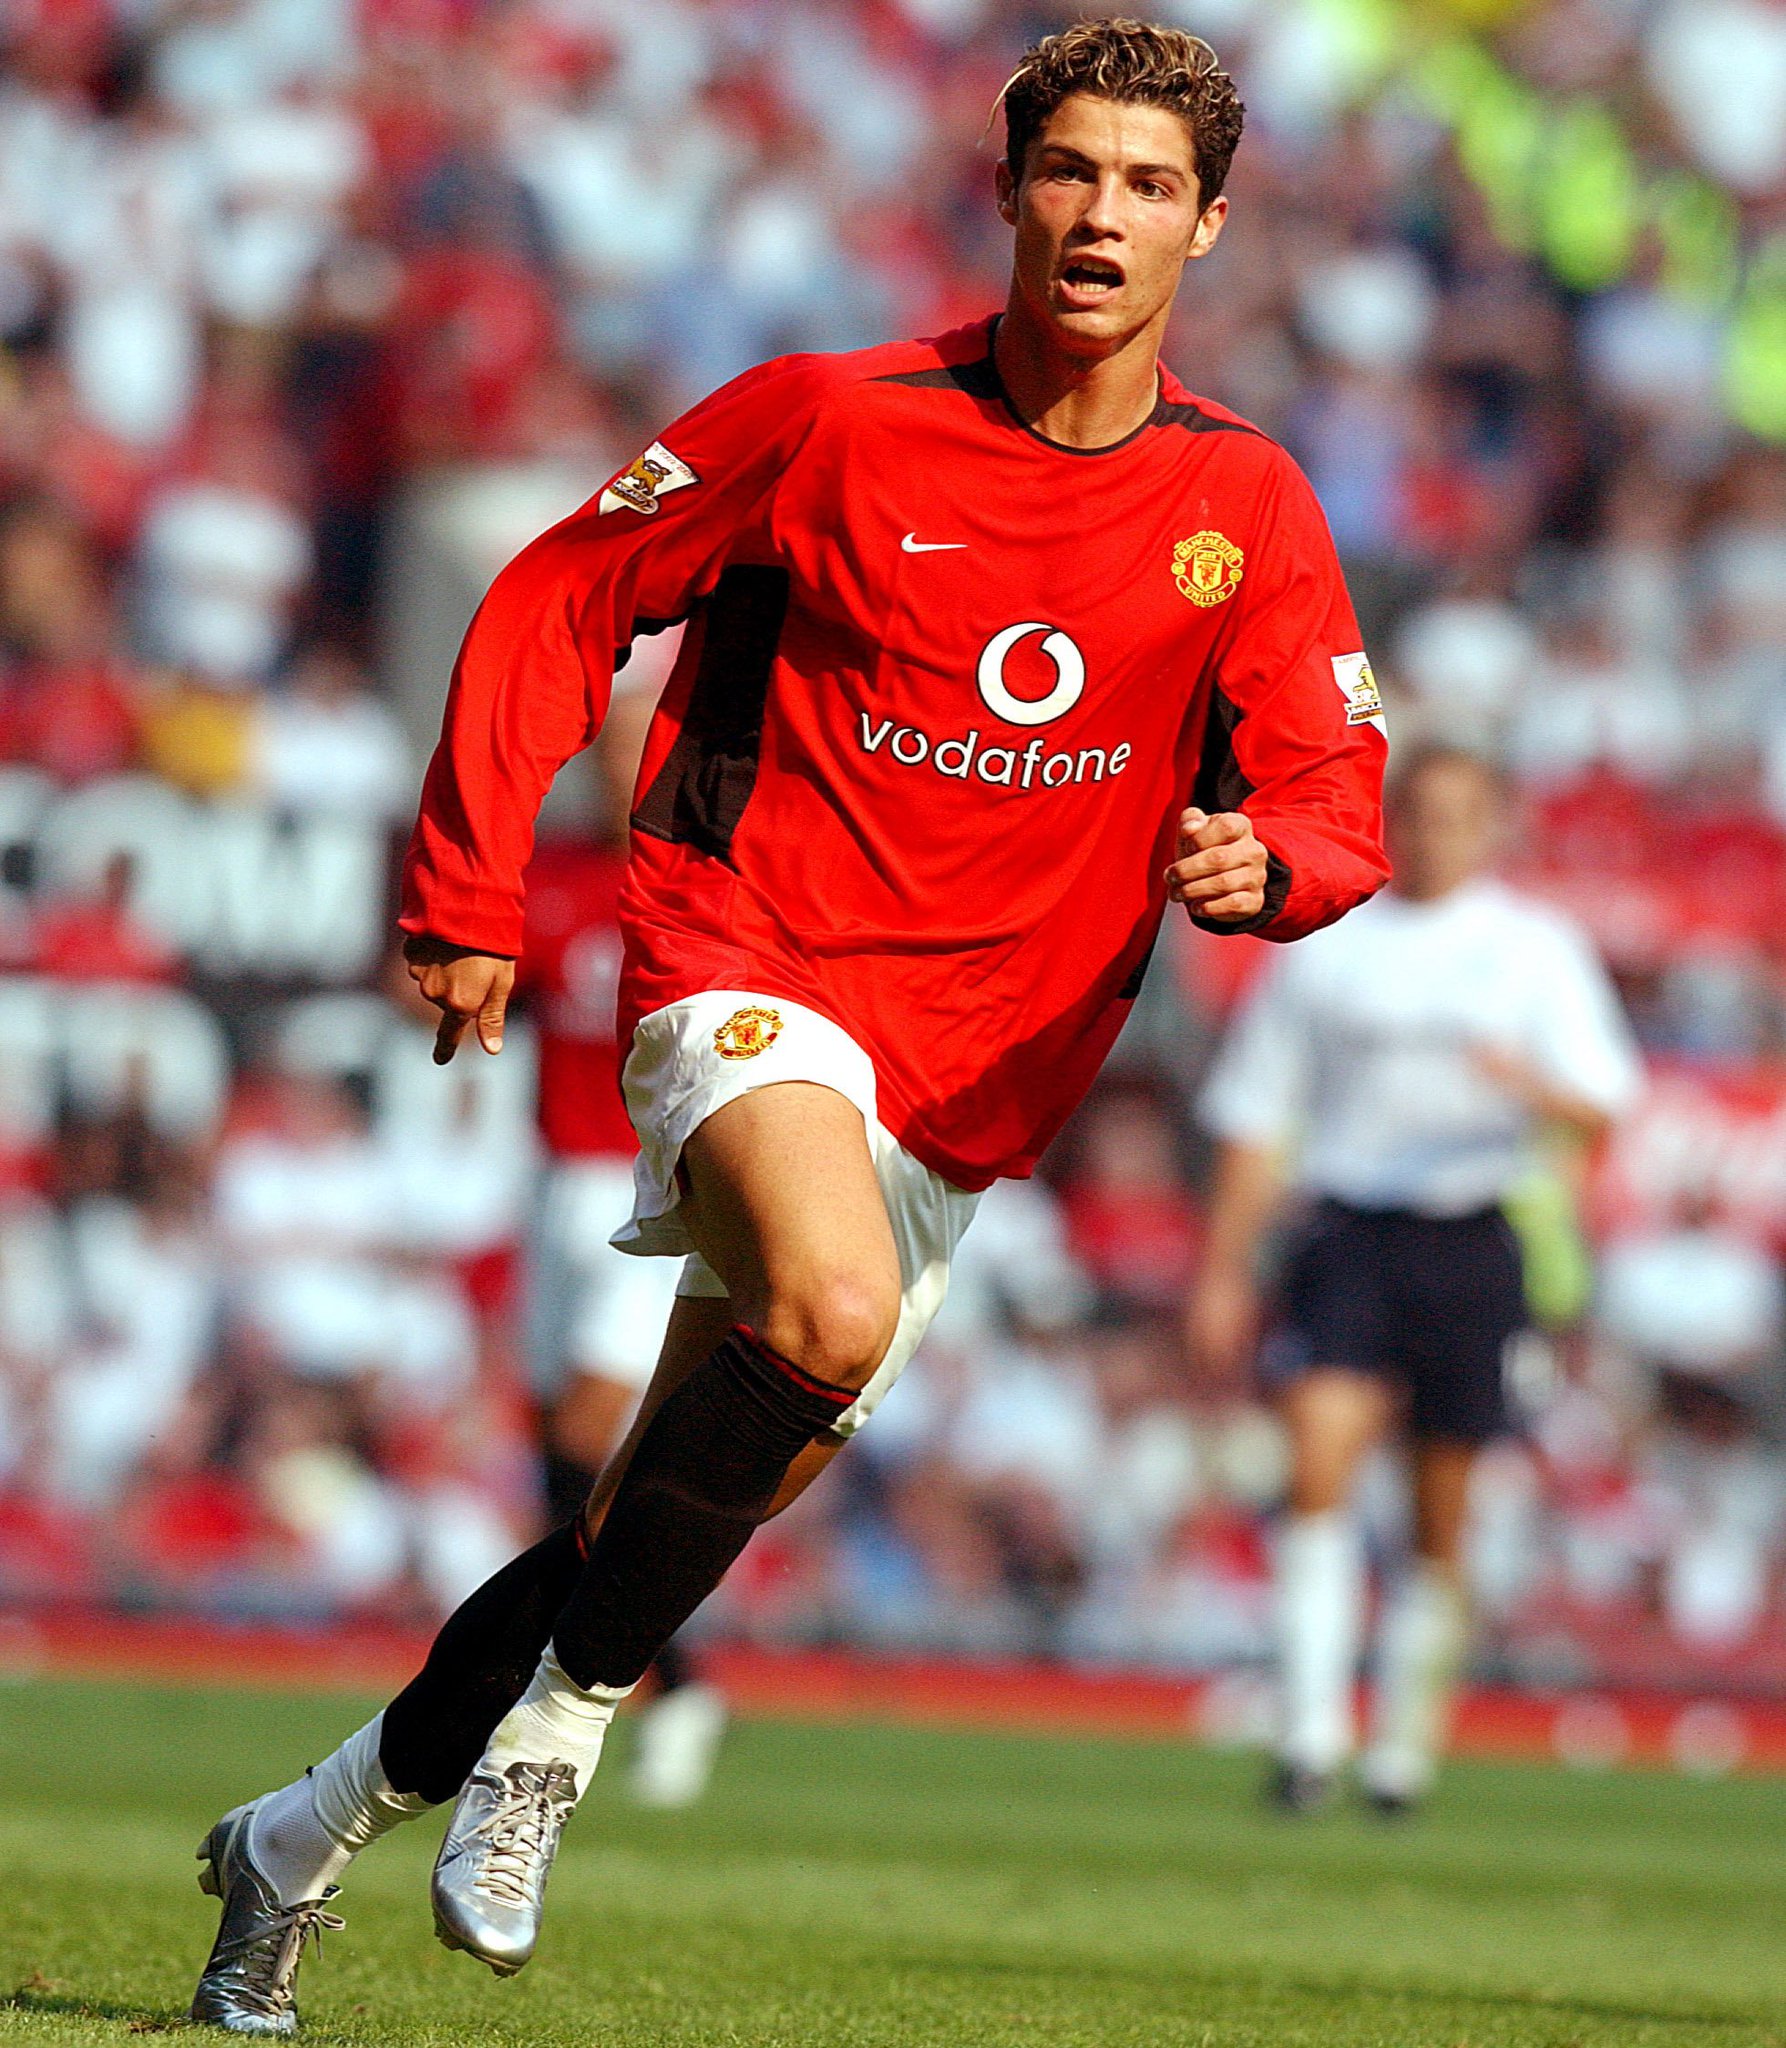 The CR7 Timeline. on Twitter "Cristiano Ronaldo vs Bolton Wanderers on